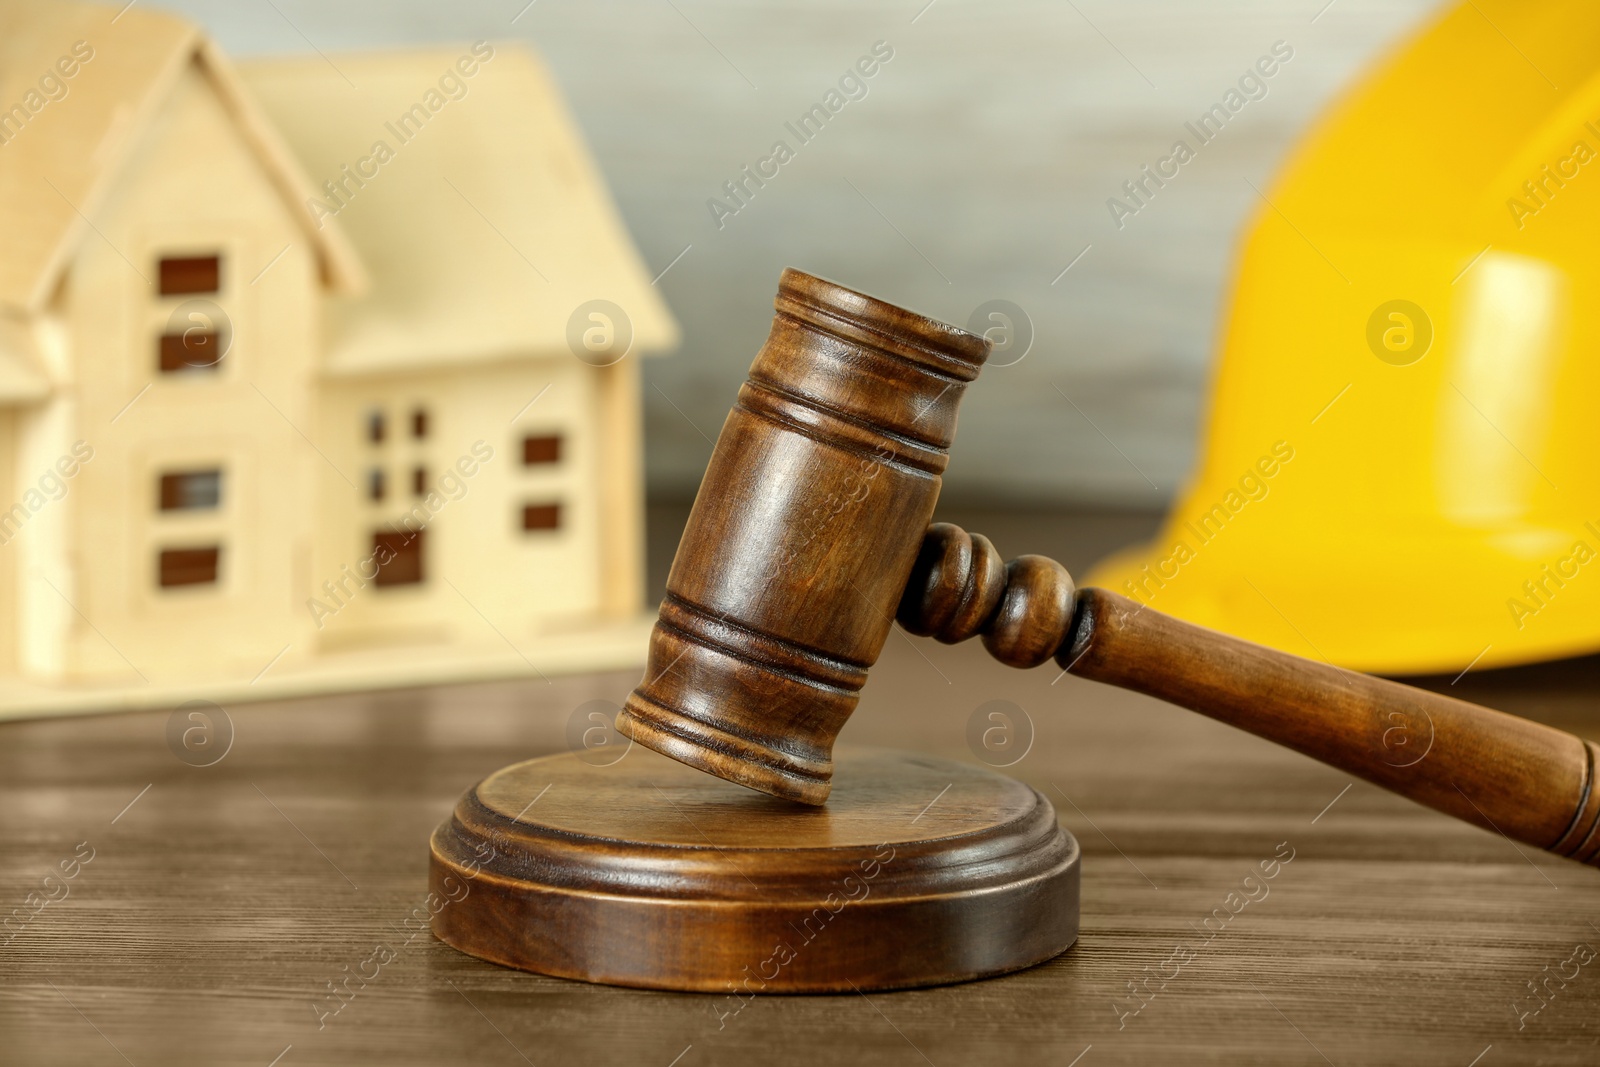 Photo of Construction and land law concepts. Judge gavel, hardhat with house model on wooden table